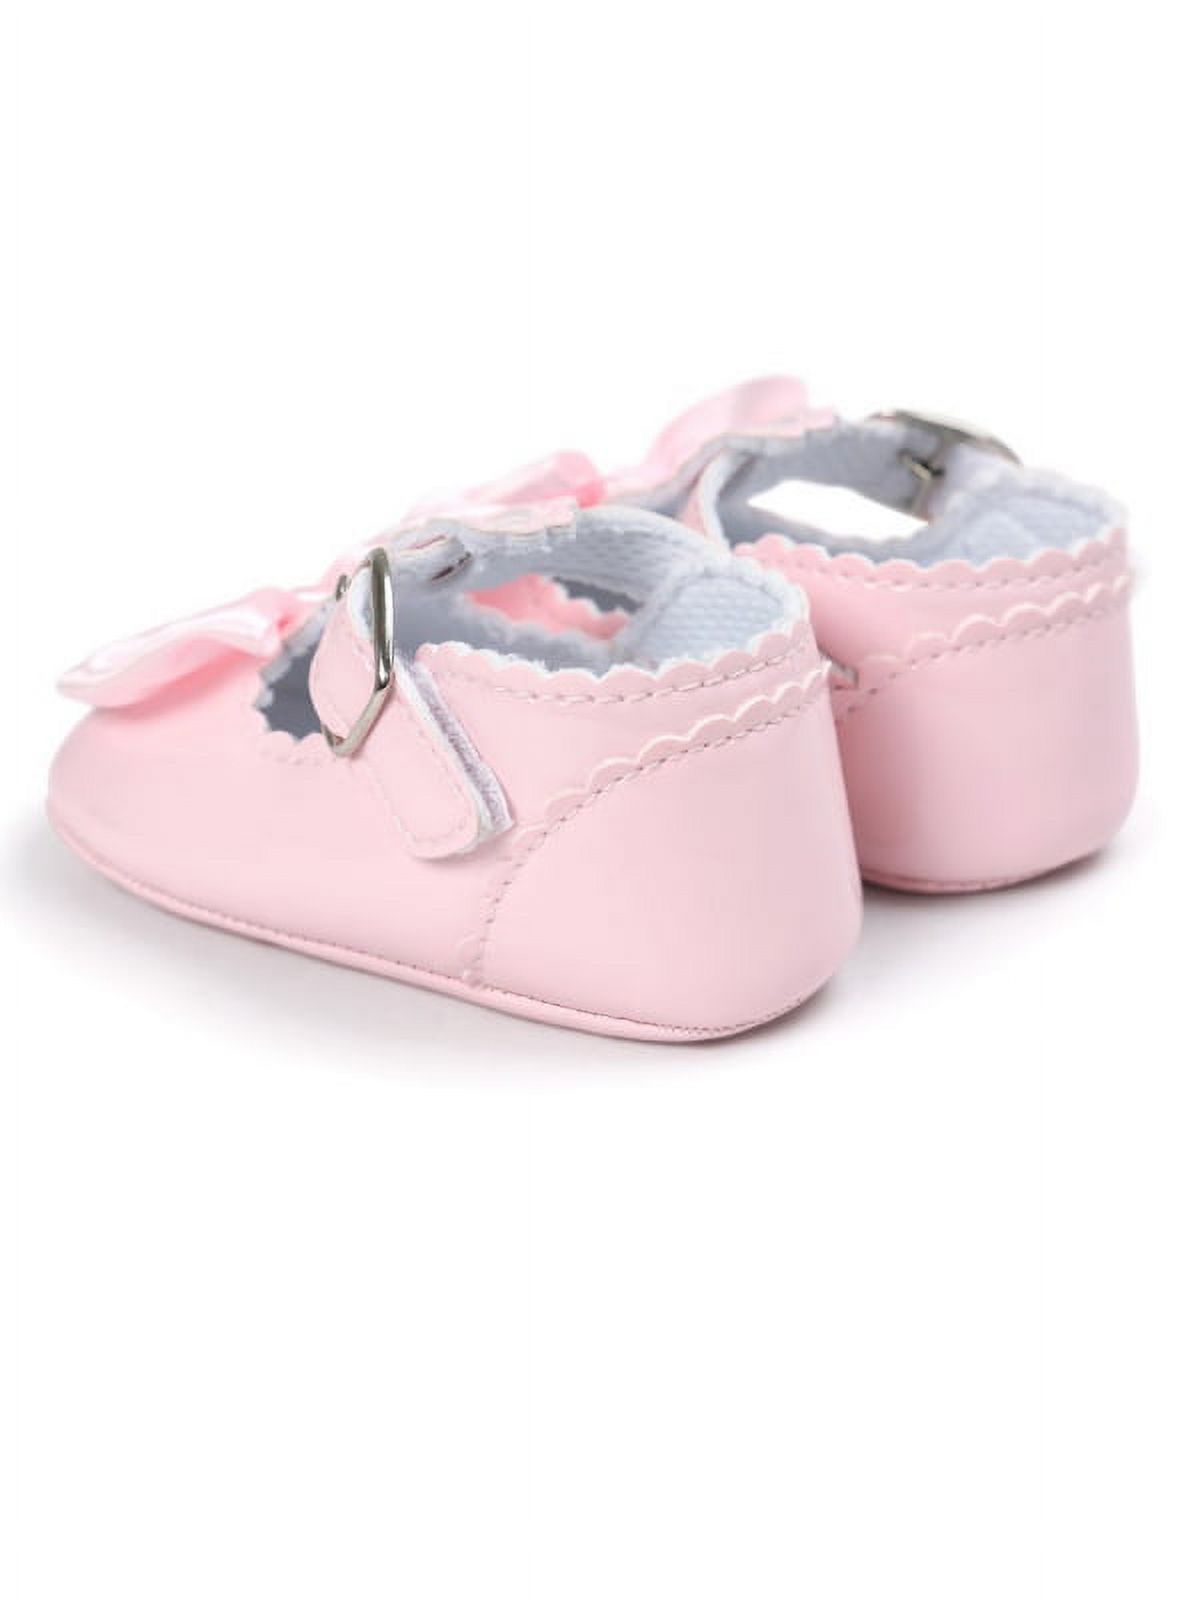 Lavaport Newborn Baby Girls Bowknot Shoes PU Leather Buckle First Walkers - image 5 of 5